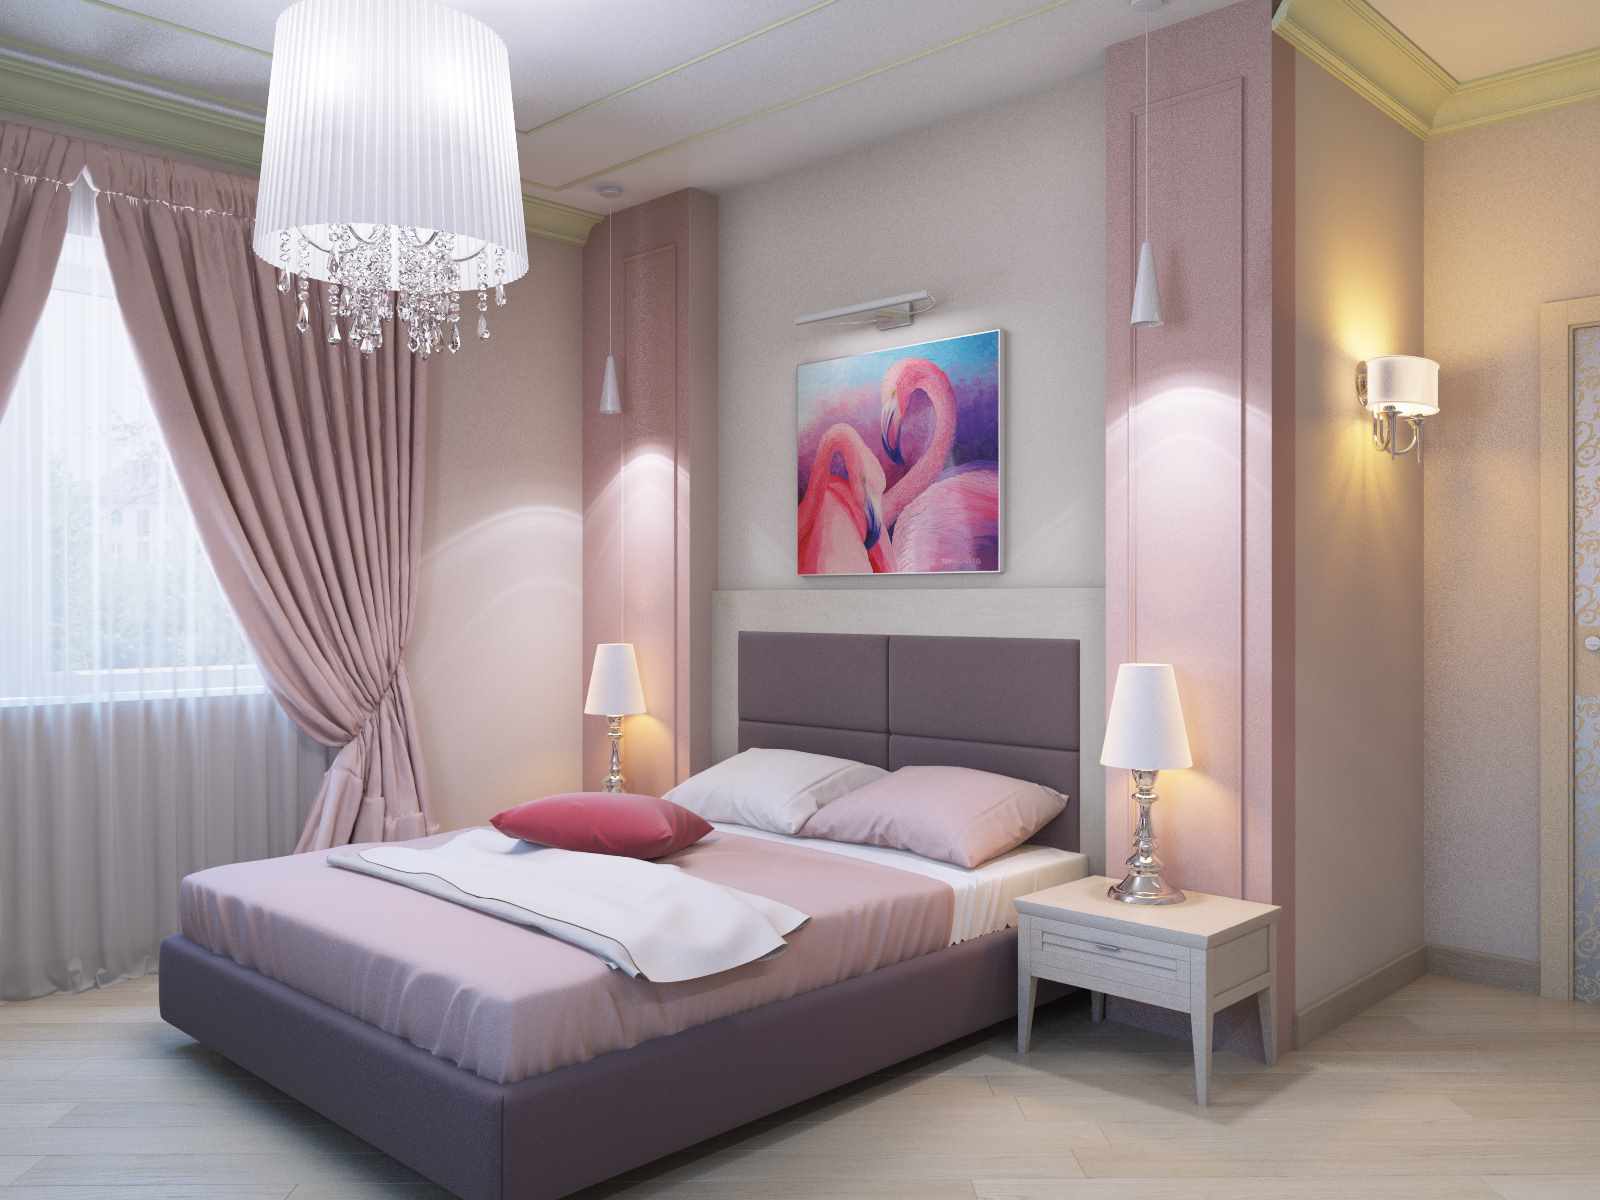 An example of a bright bedroom interior